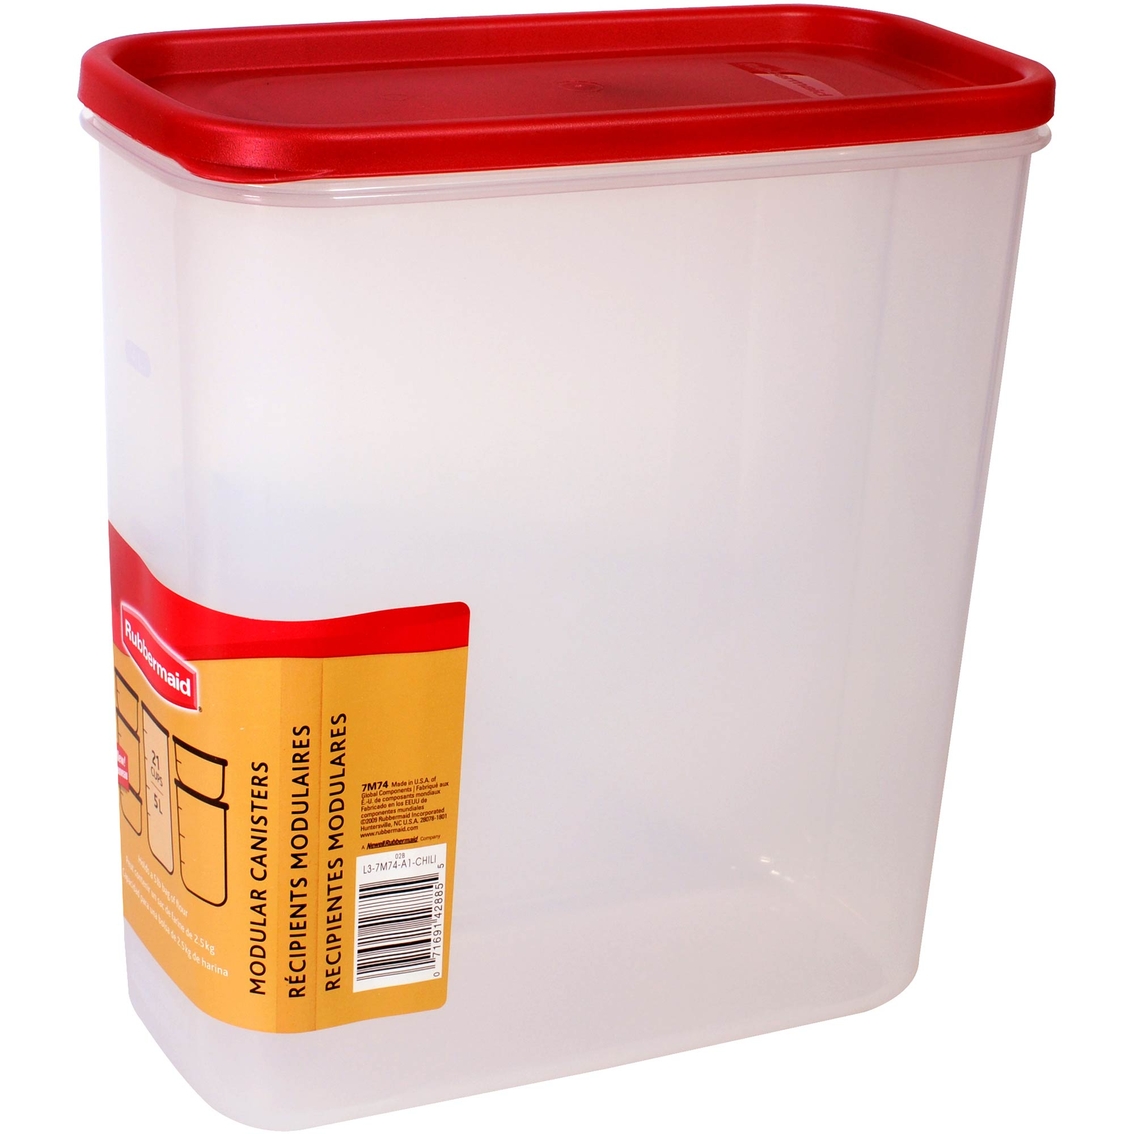 Rubbermaid 21 Cup Dry Food Container, Food Storage, Household